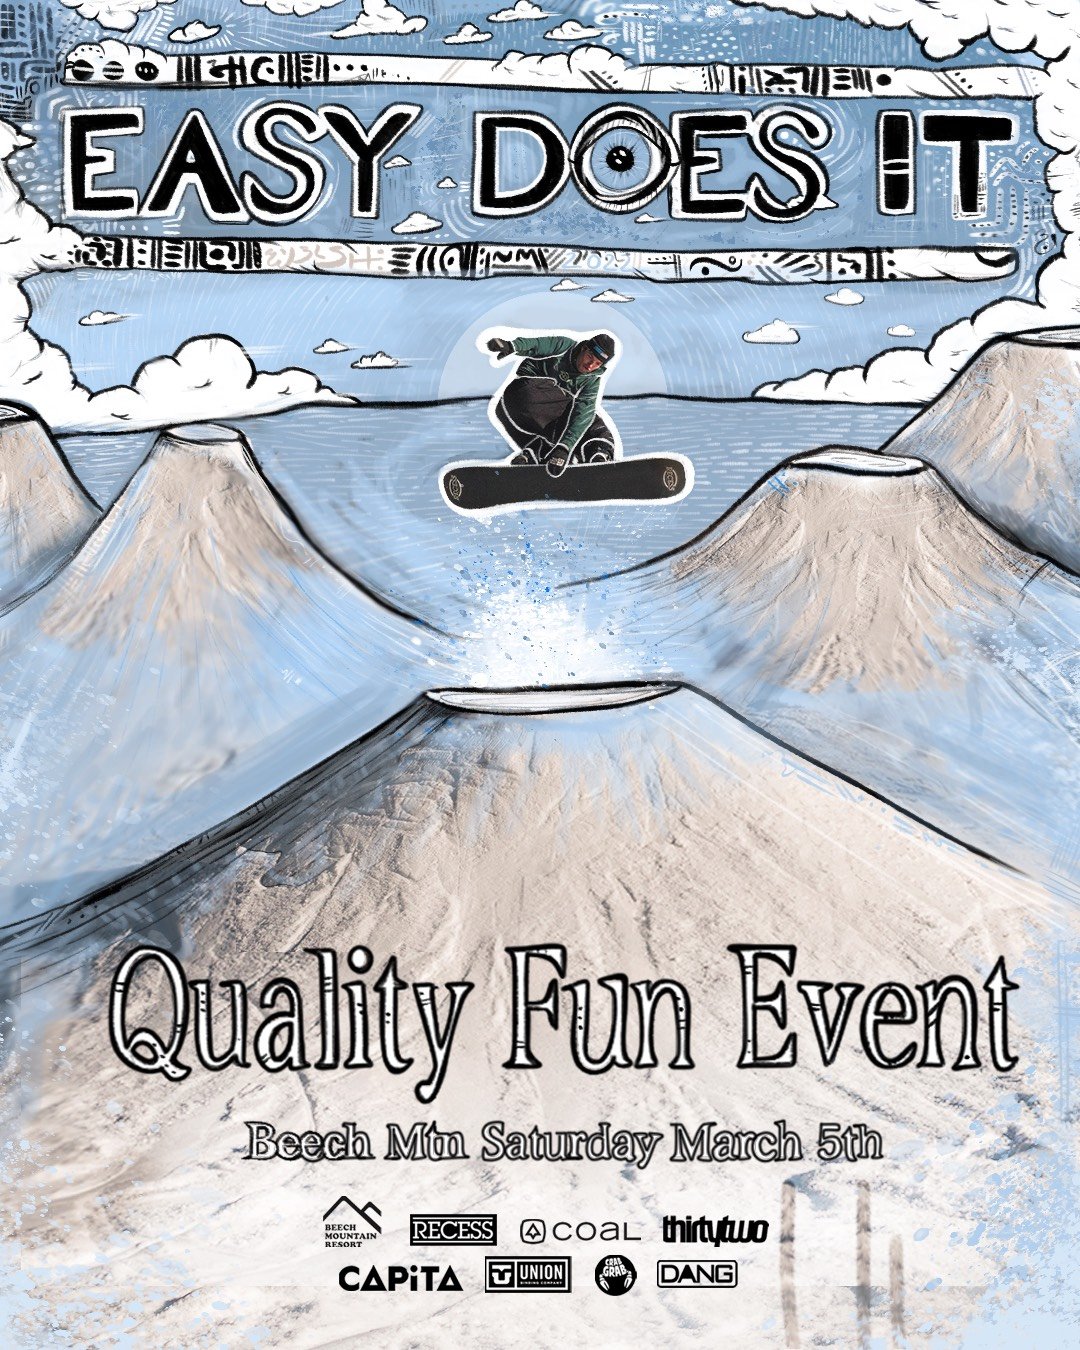 Flyer for easy does it. There is a snowboarder in the middle top of the mountain graphics doing a trick